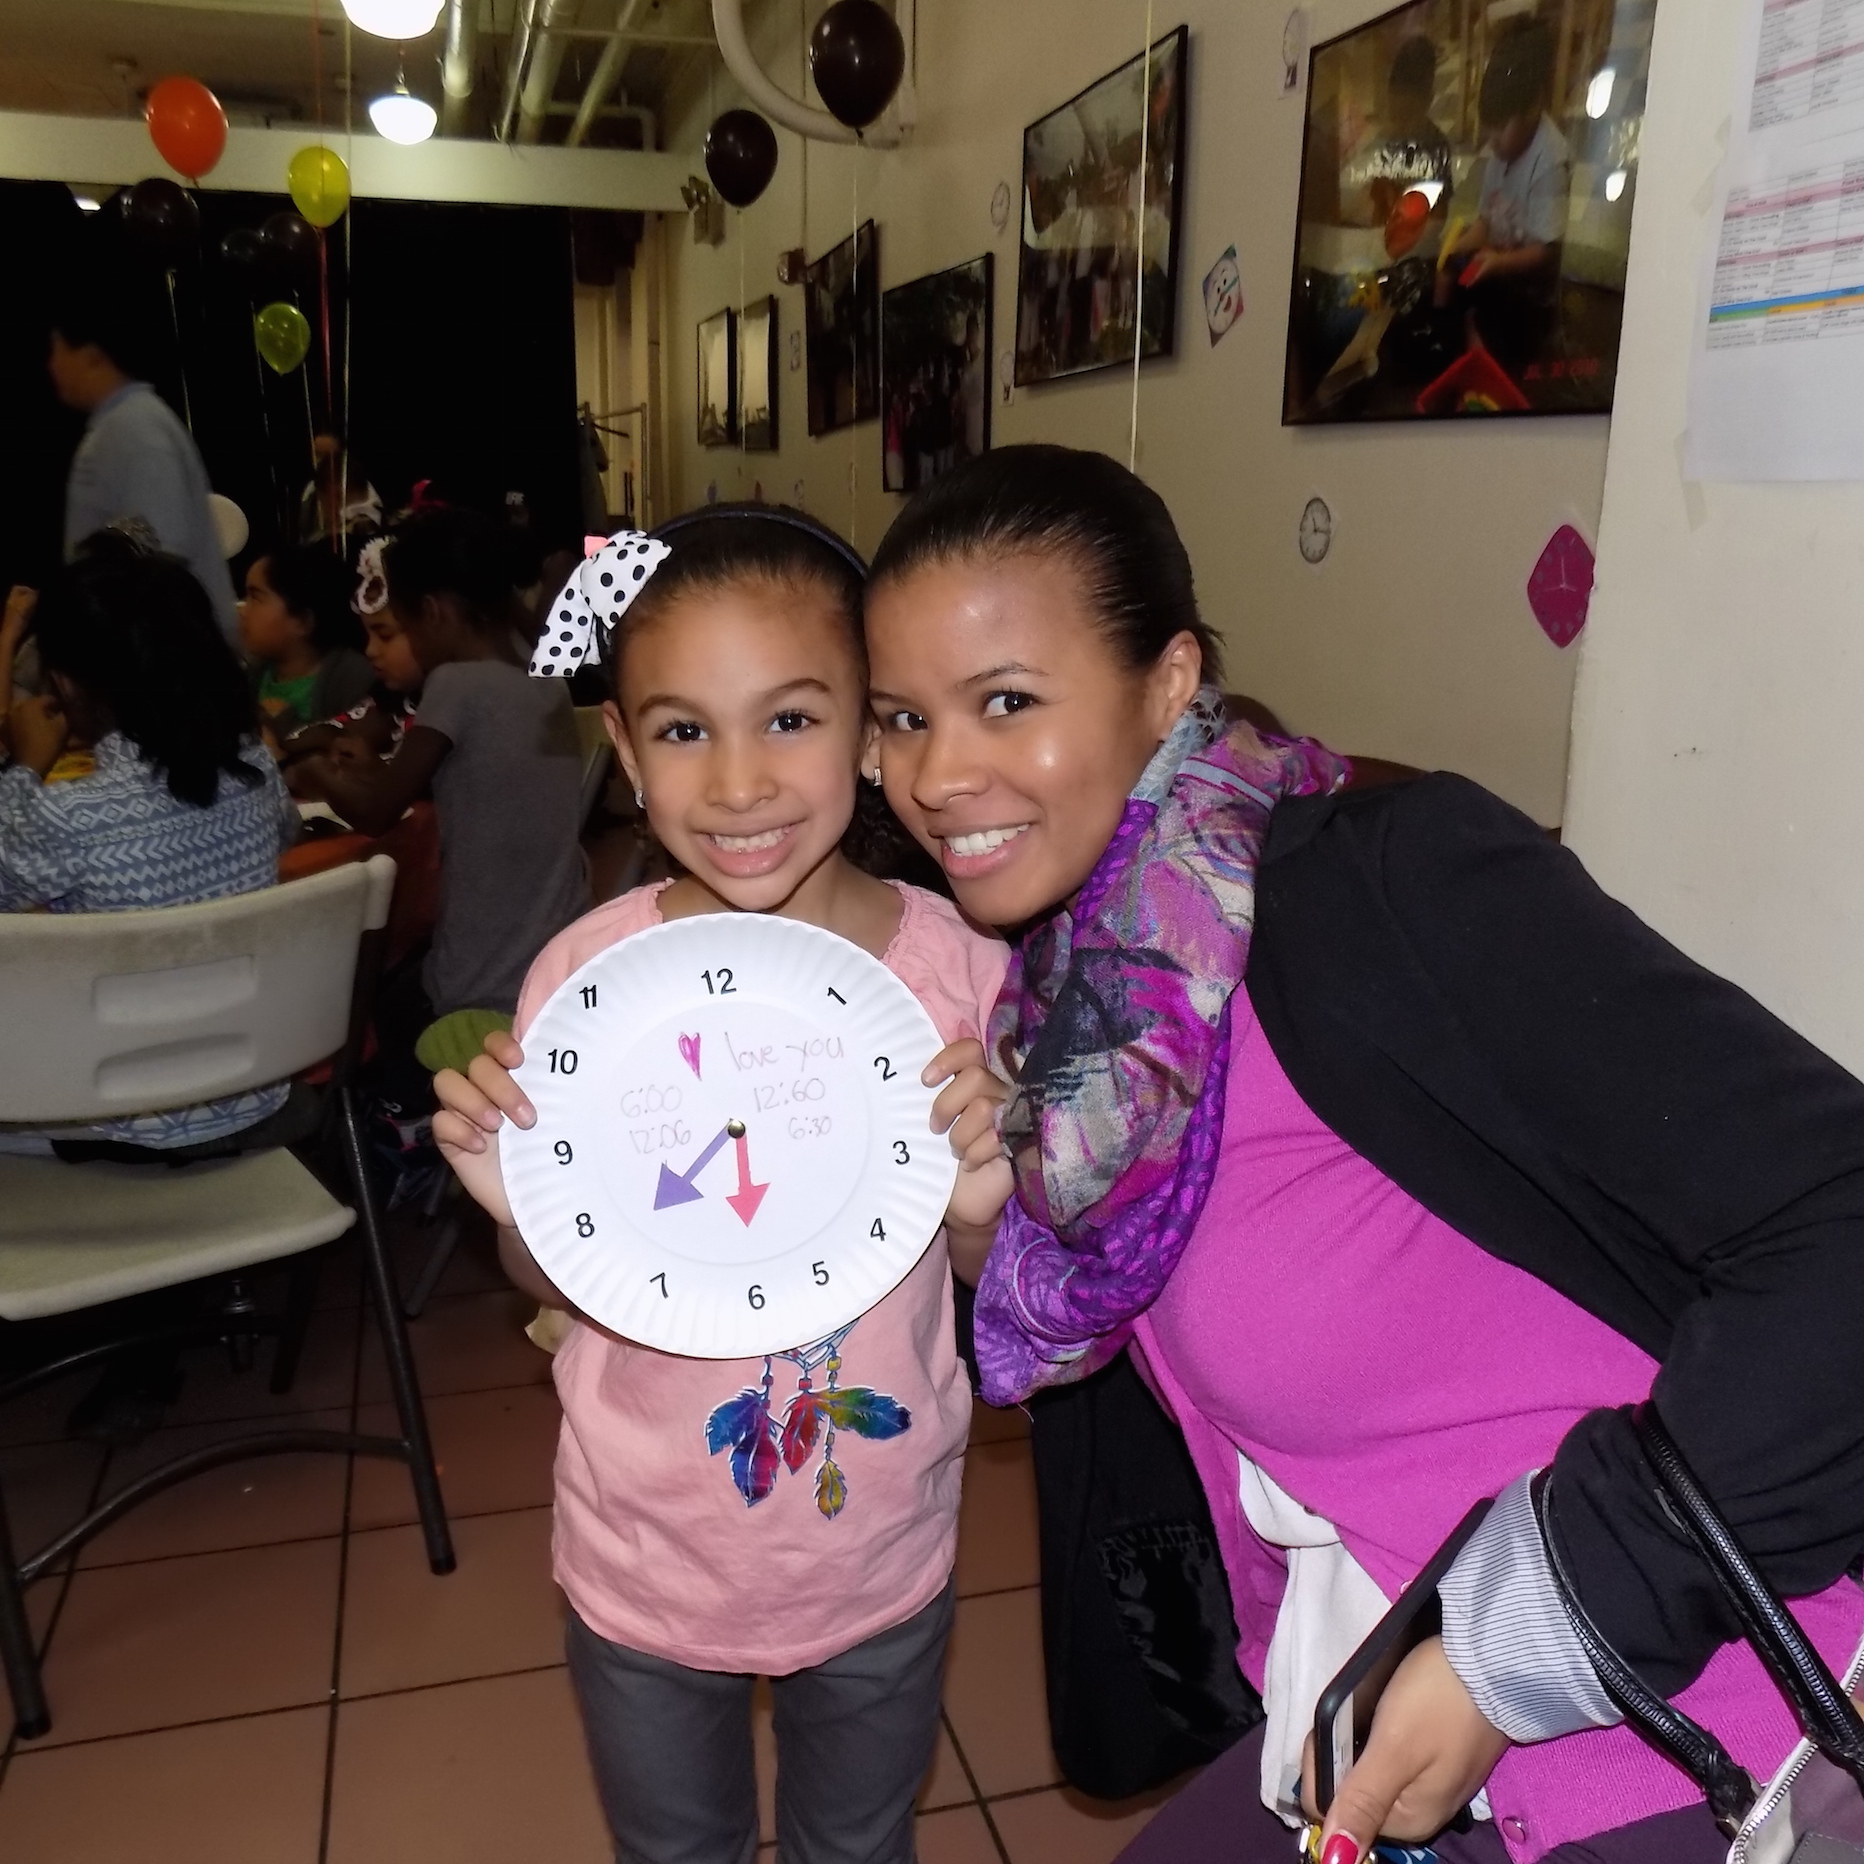 Watch Retailer Provides Bronx-Based Community Center With Time Learning Workshop And Free Watches For Children